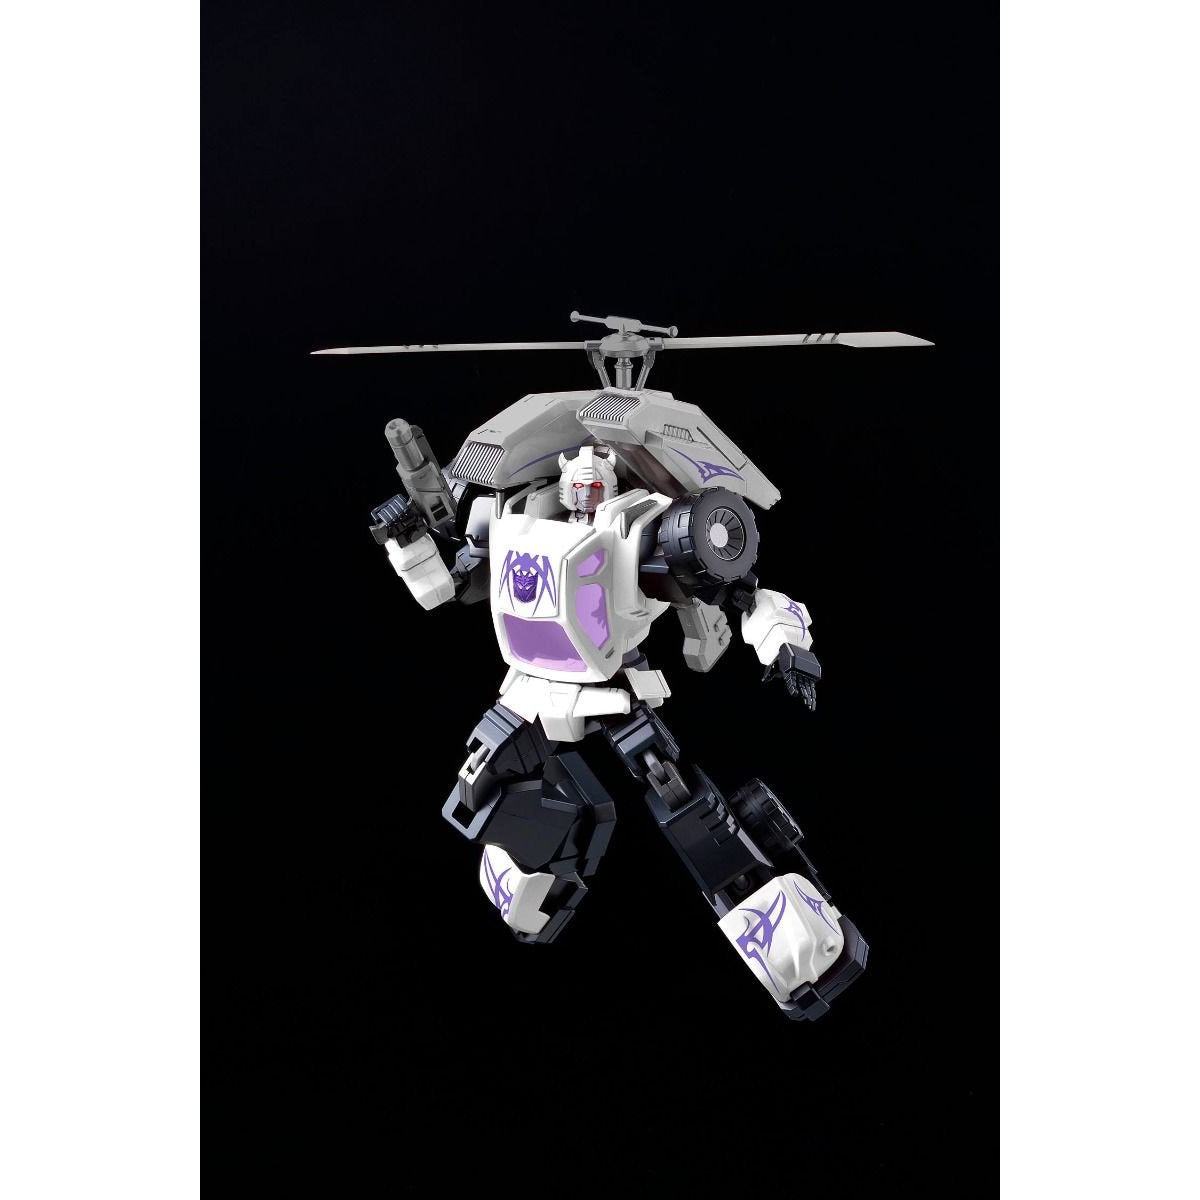 Bugbite (Exclusive Edition) Transformers Furai Model #51370 Action Figure Model Kit by Flame Toys